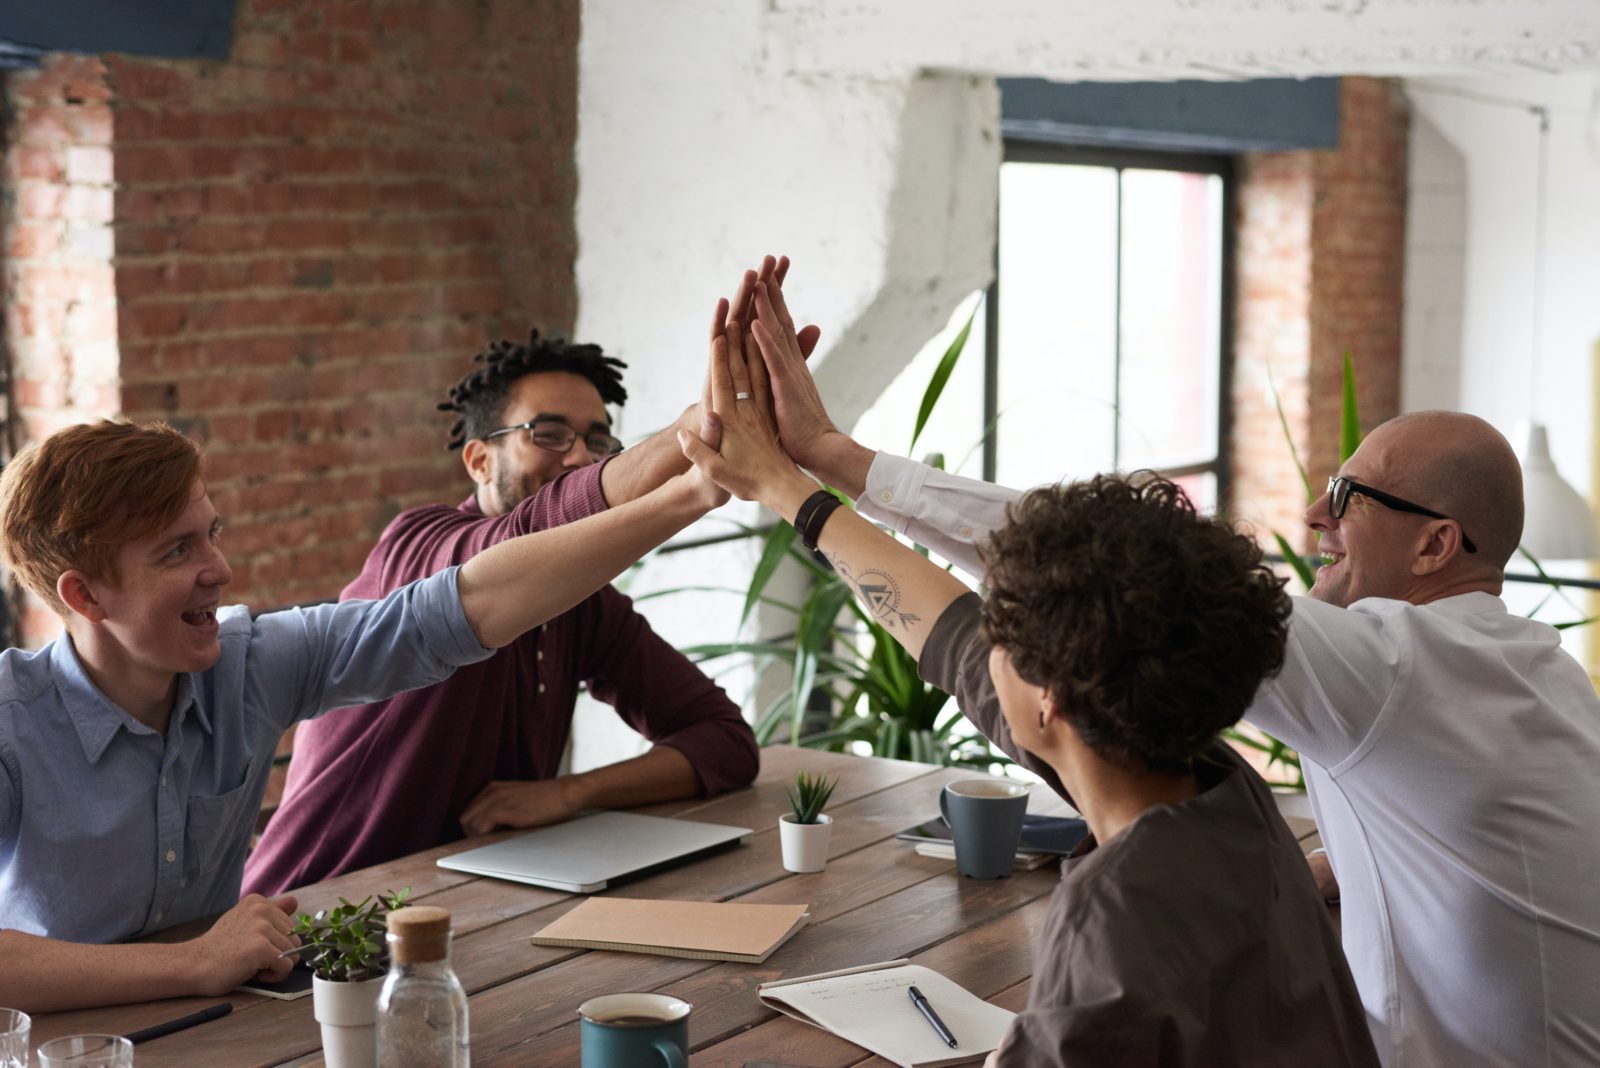 A team does a group high-five while sitting at a conference table in a contemporary office